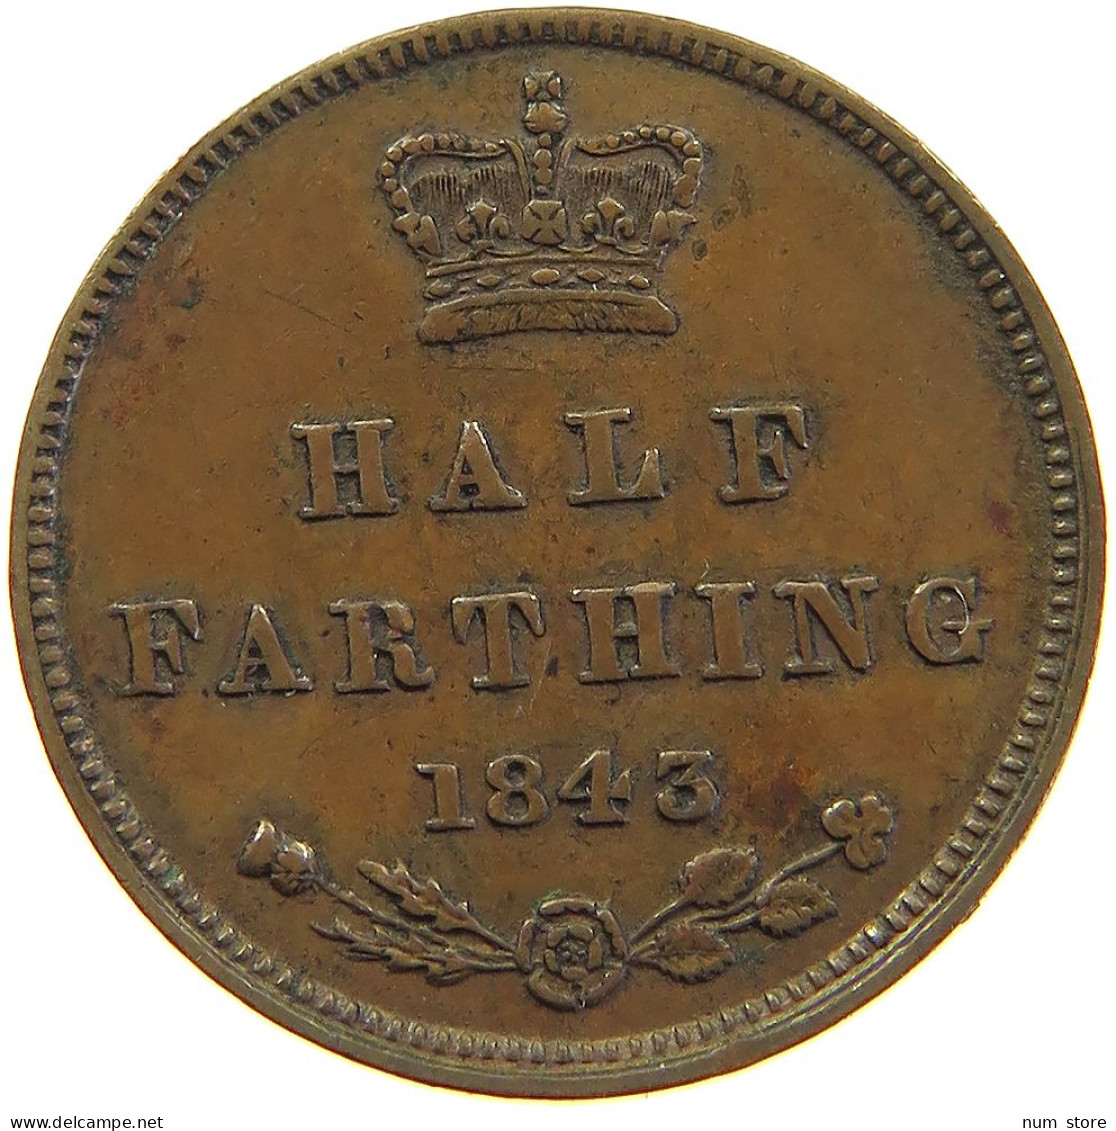 GREAT BRITAIN 1/2 FARTHING 1843 Victoria 1837-1901 #t021 0167 - A. 1/4 - 1/3 - 1/2 Farthing